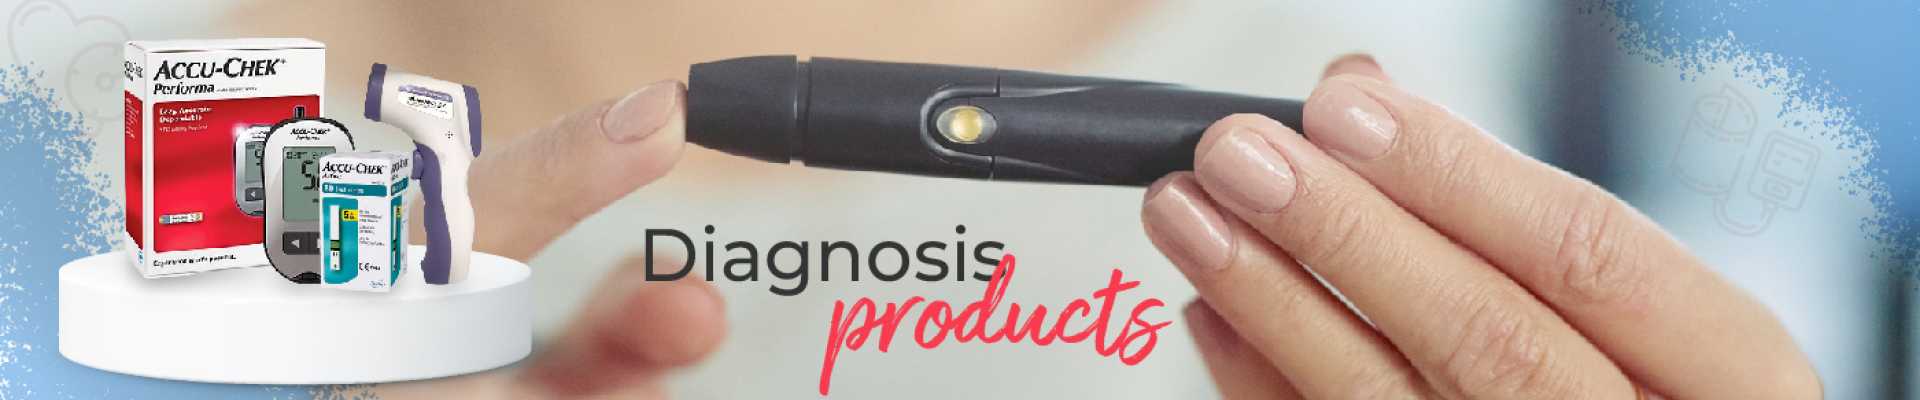 diagnosis product slider